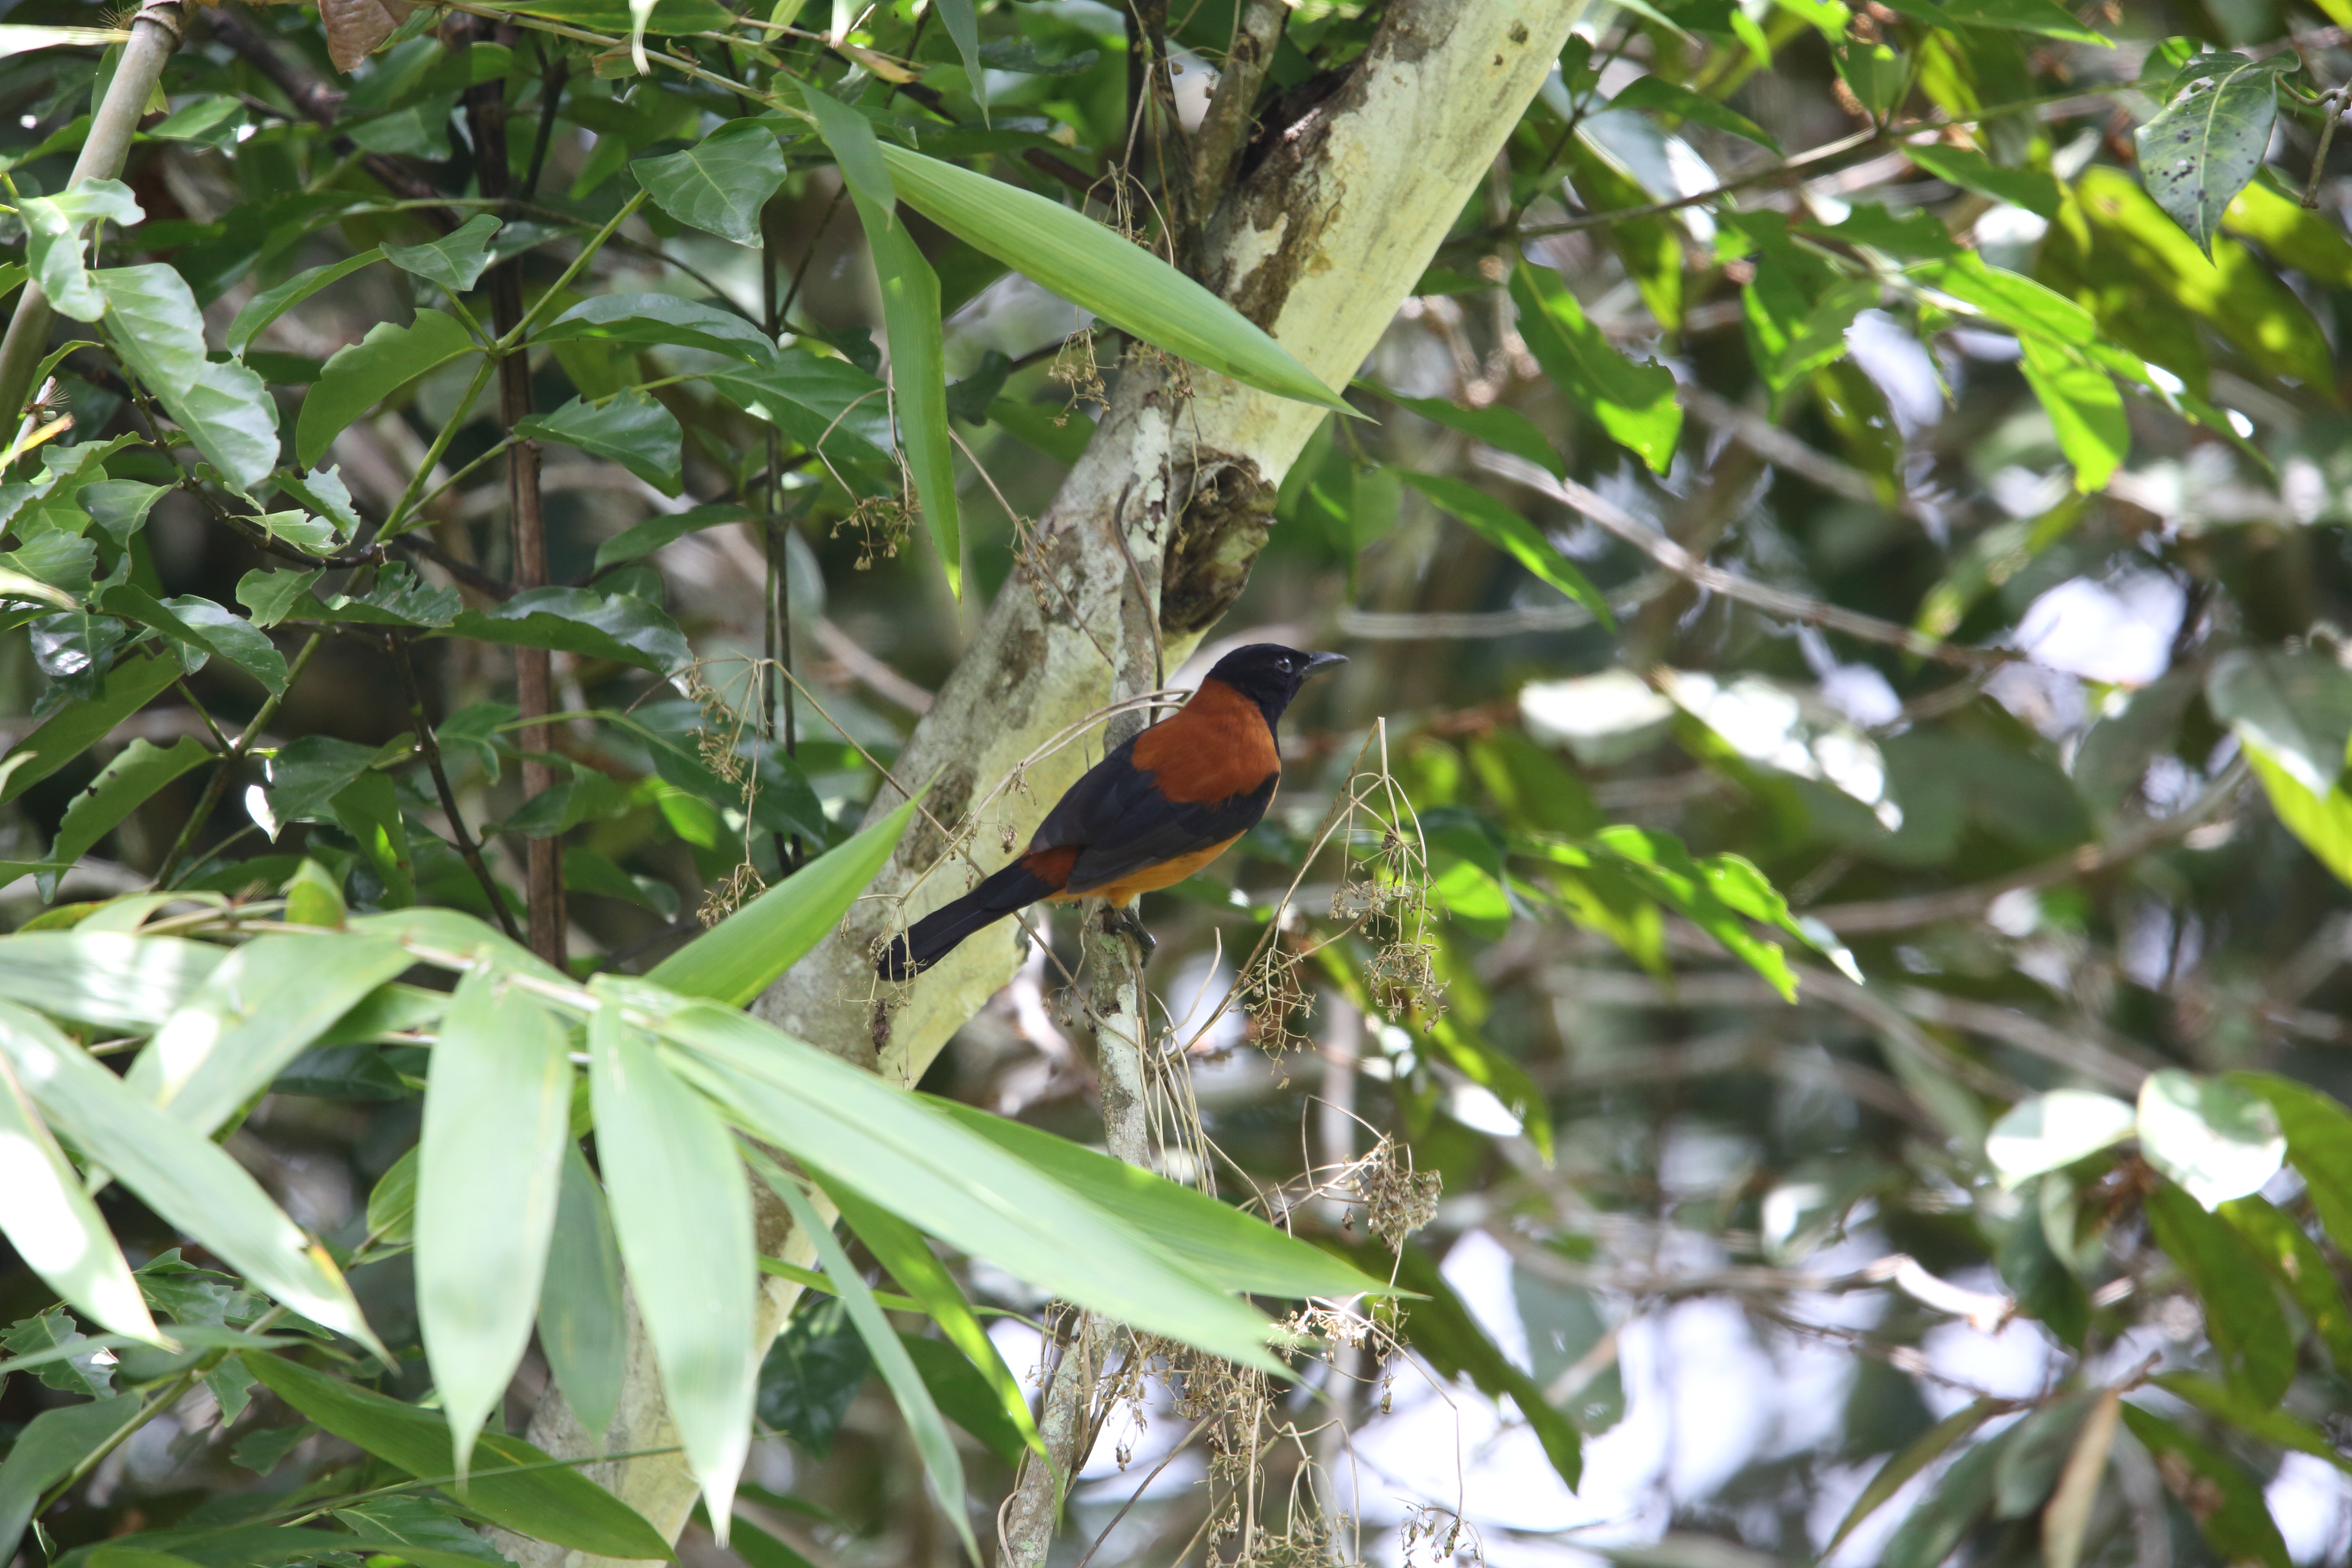 The pitohui of New Guinea was the first known poisonous bird – the same Batrachotoxin as with golden poison arrow frog. Probable reason: similar food preferences of frog and bird. | feathercollector/Shutterstock.com